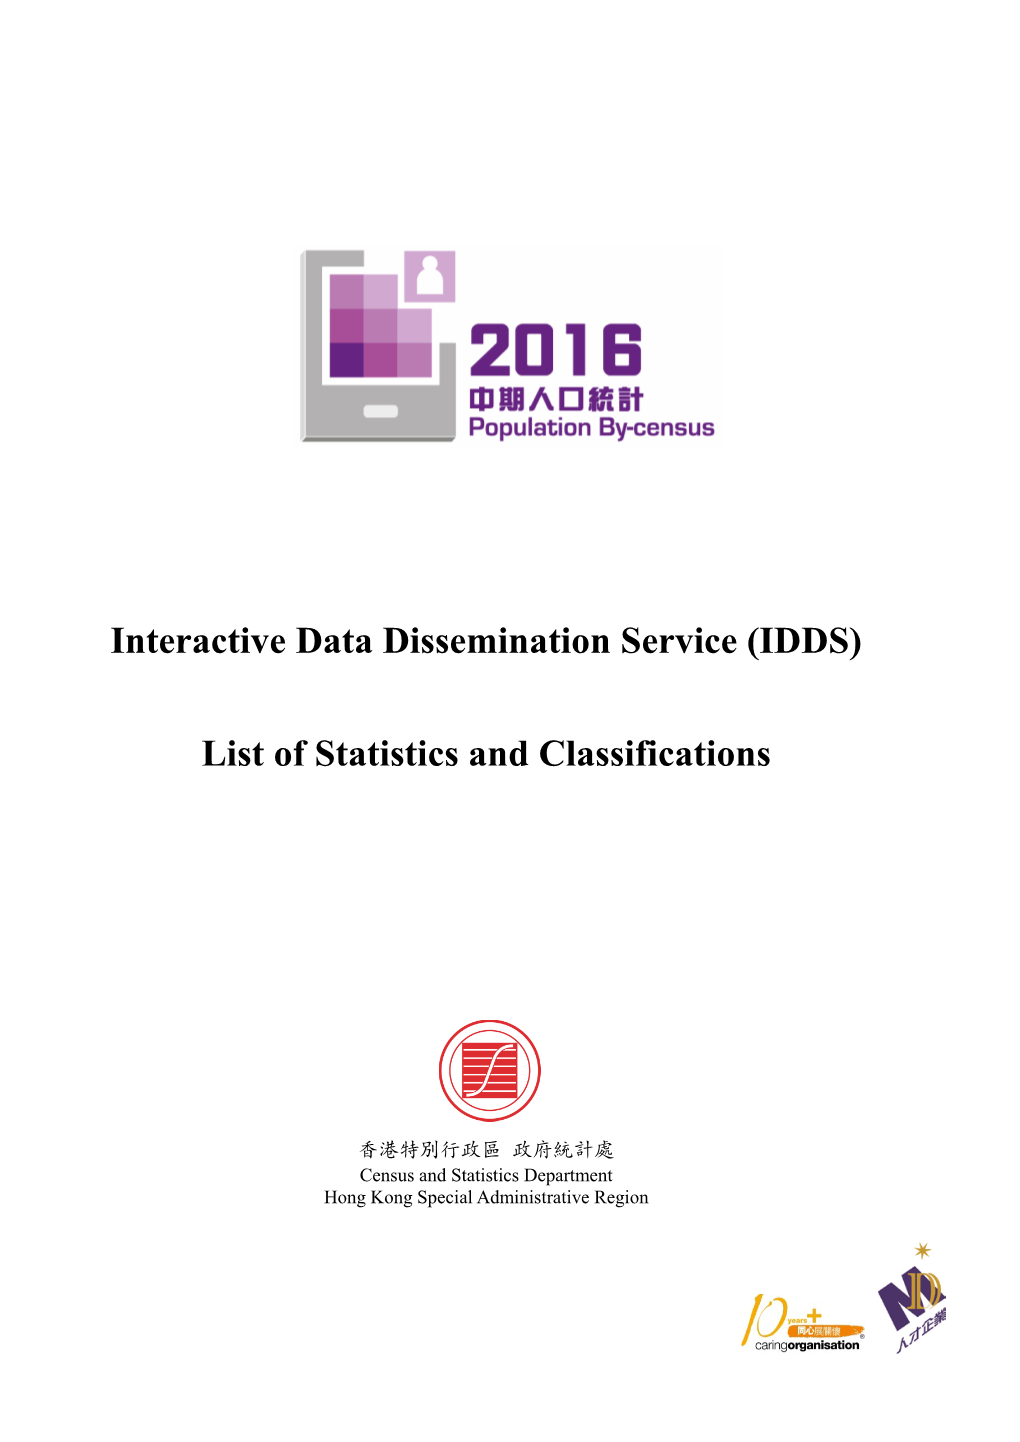 Interactive Data Dissemination Service (IDDS) List of Statistics and Classifications